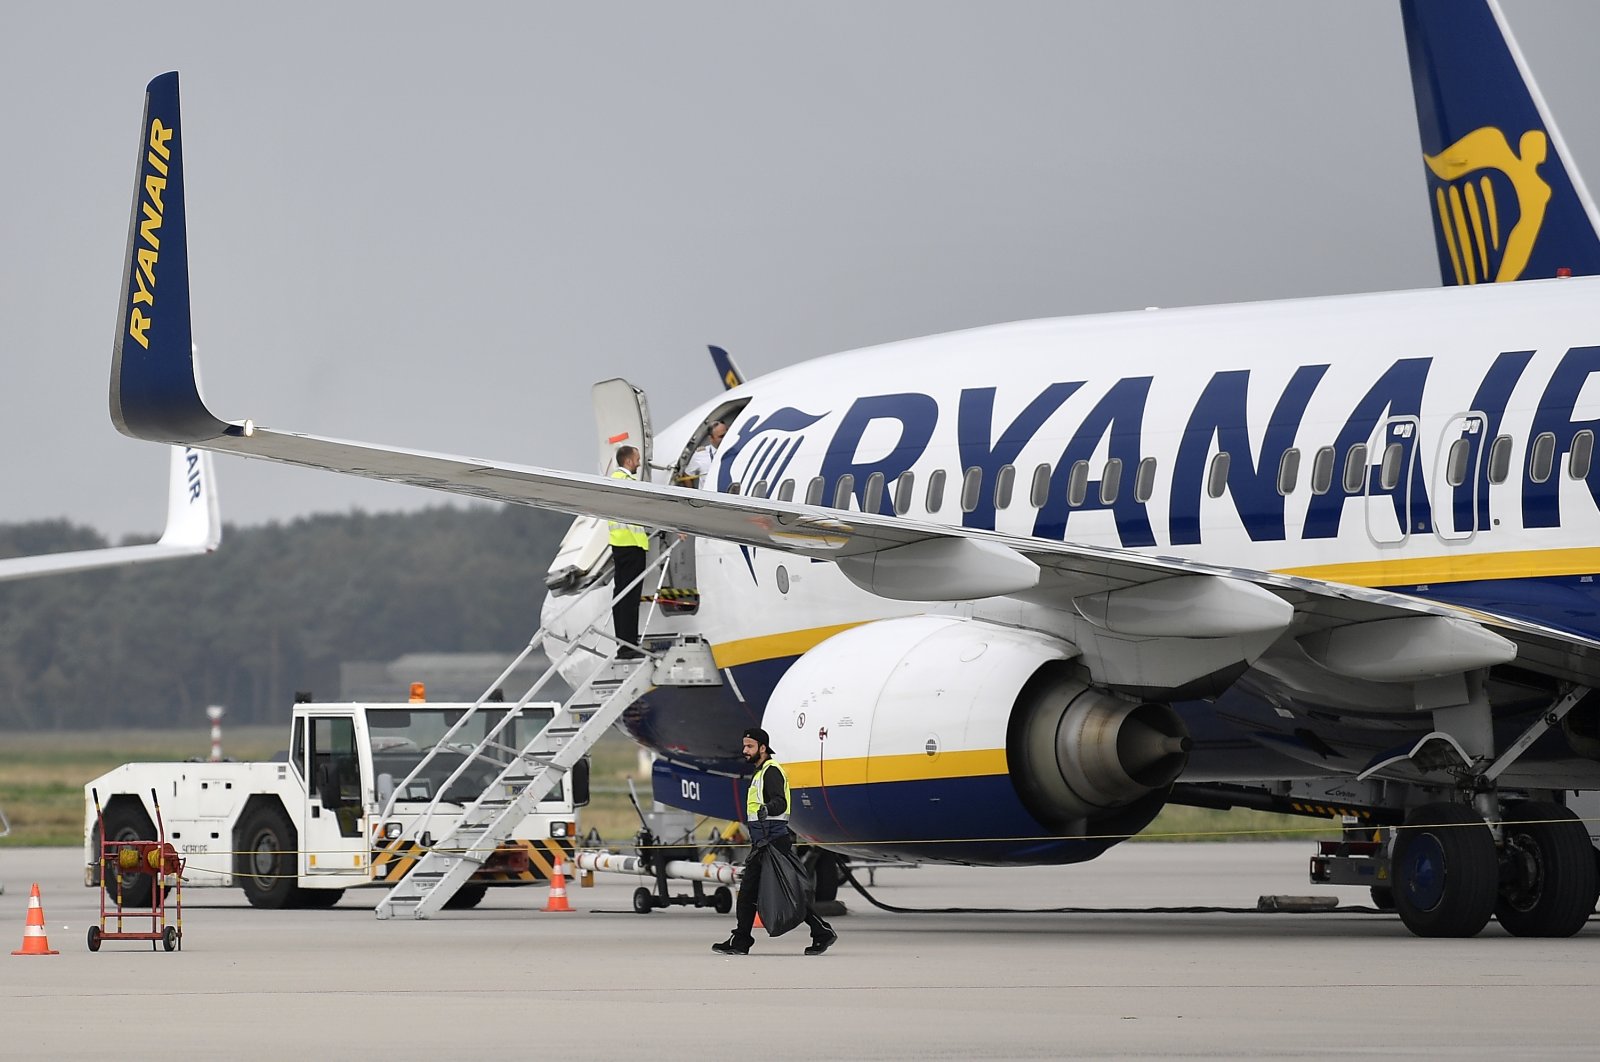 A Ryanair plane parks at the airport in Weeze, Germany, Sept. 12, 2018. (AP File Photo)